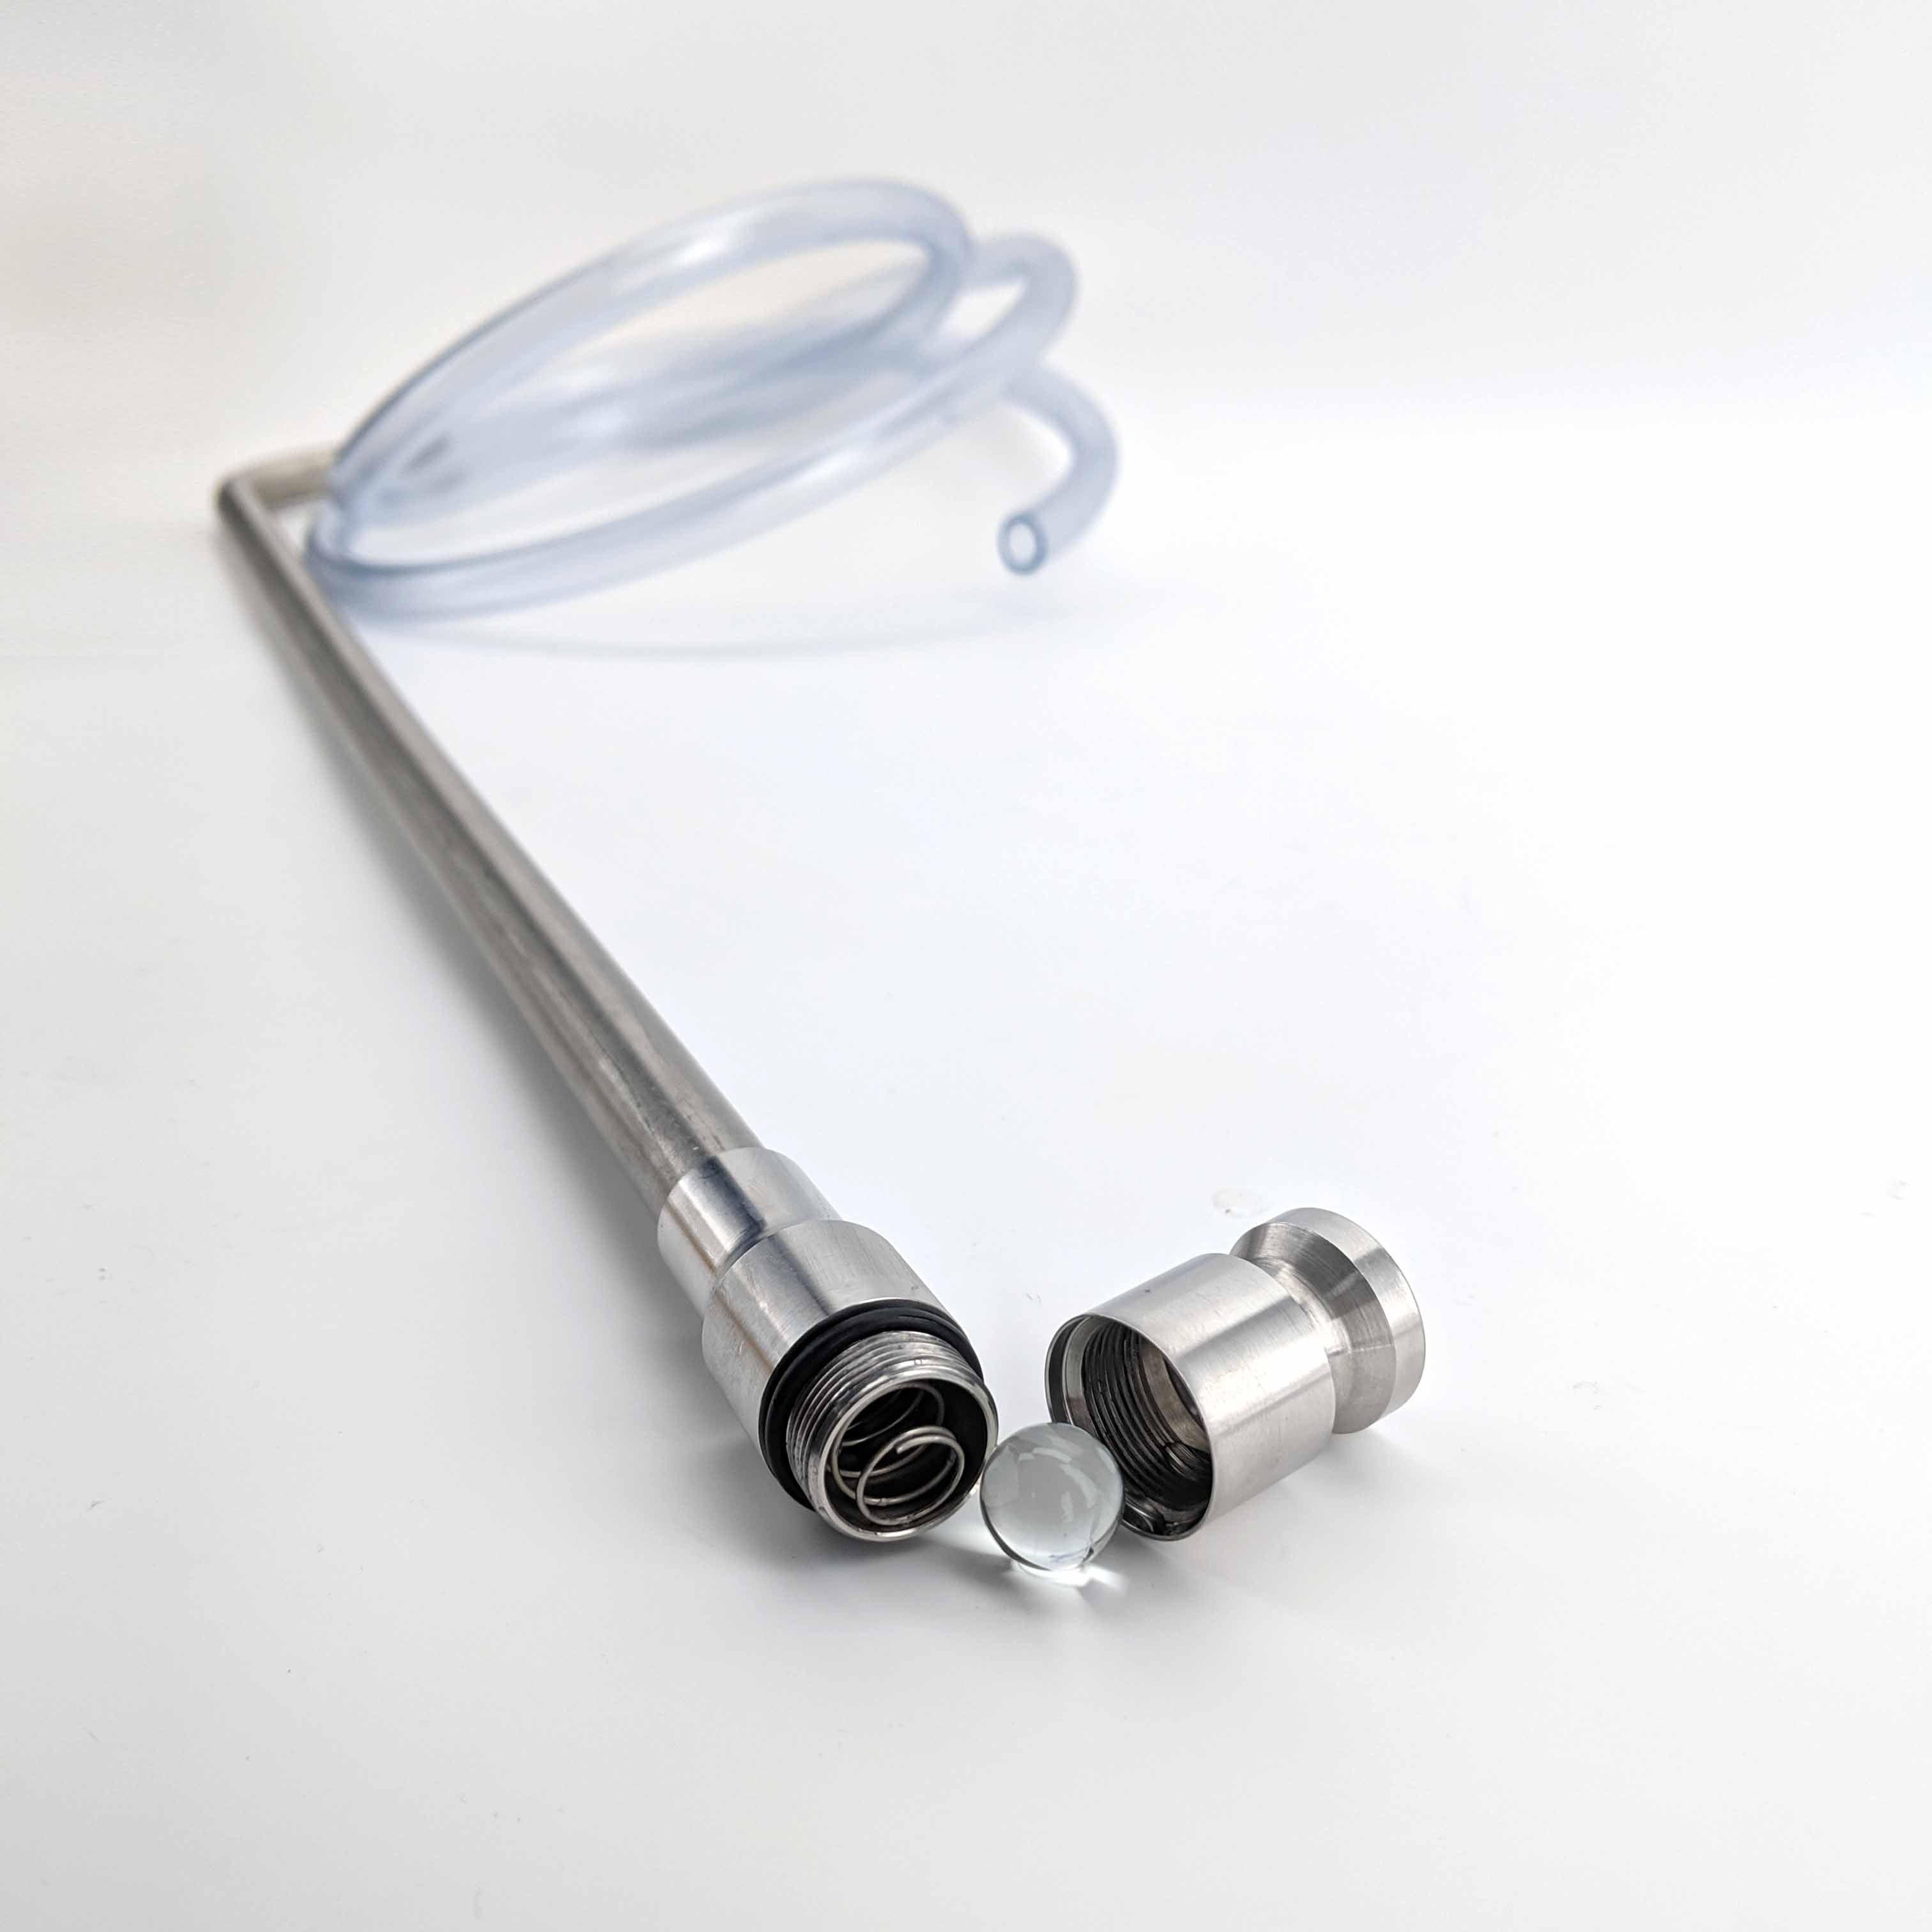 57cm Stainless Siphon with 1.5m Heavy Duty Silicone Tube (10mm ID) - KegLand